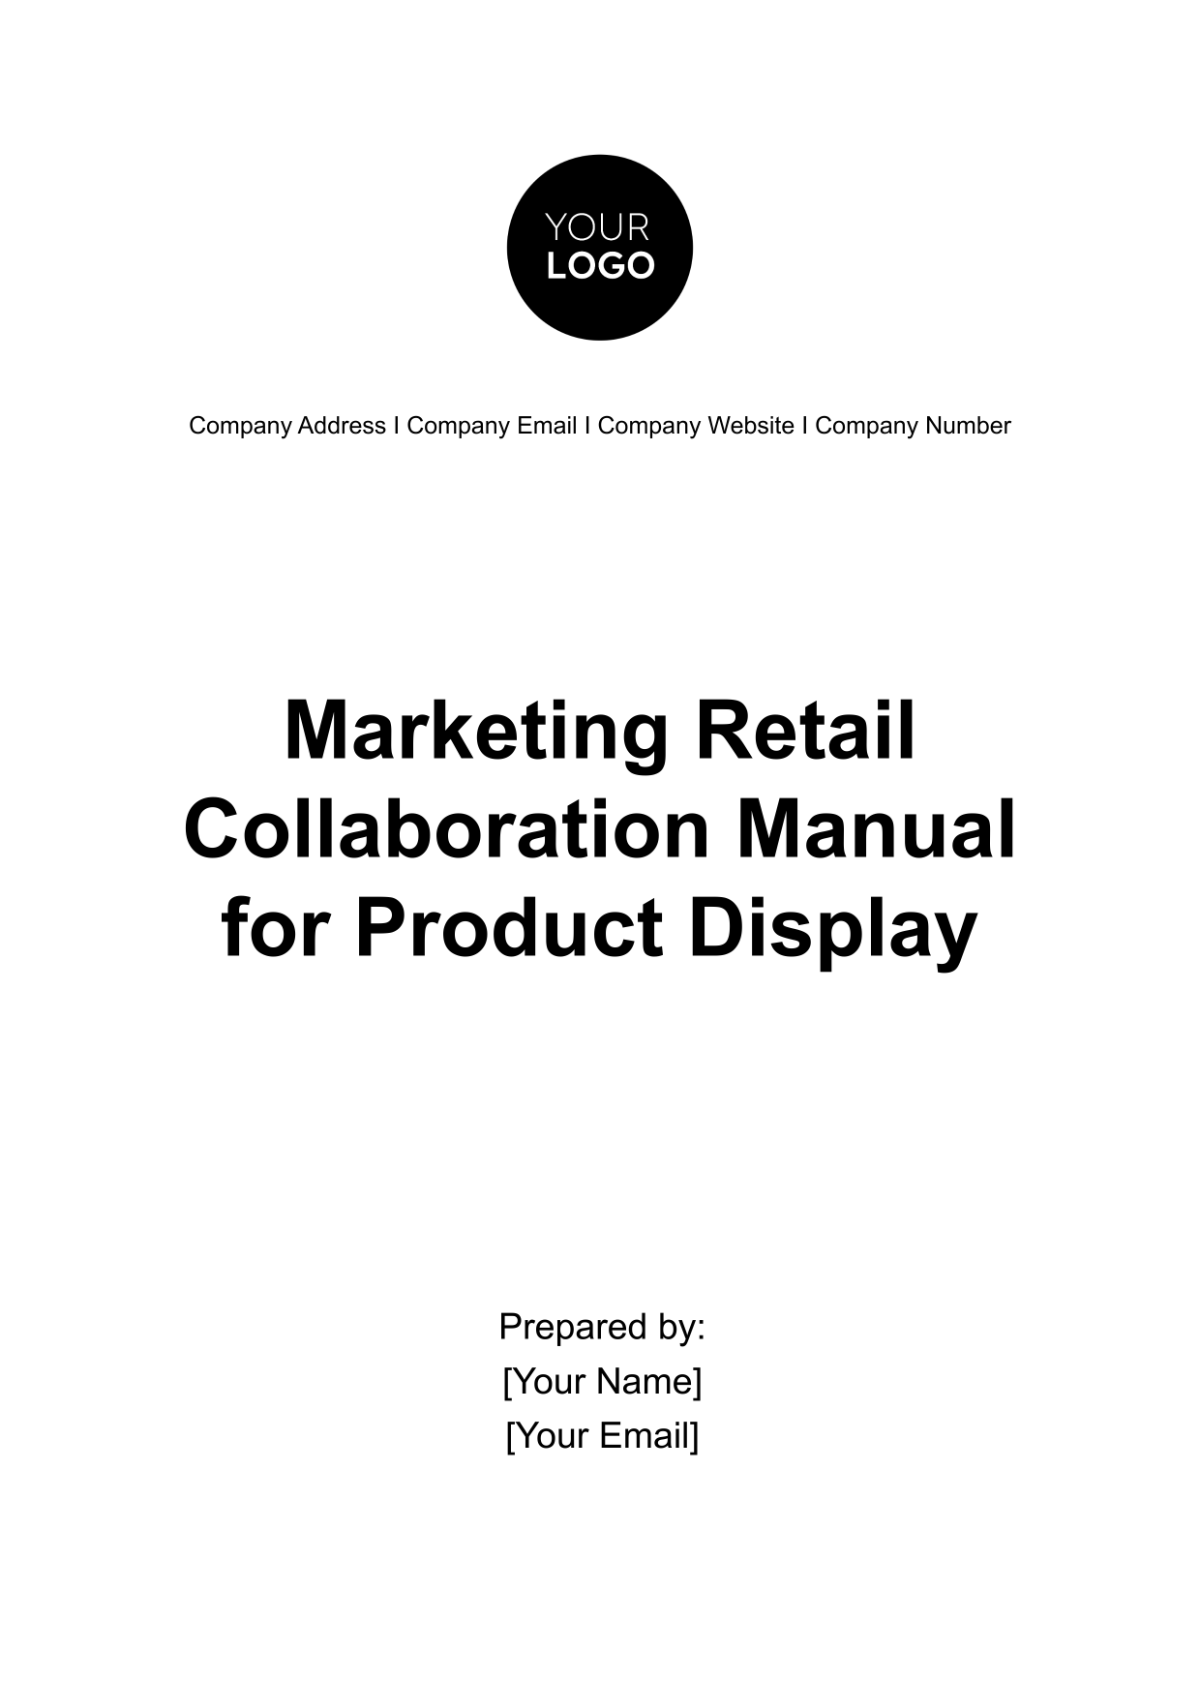 Marketing Retailer Collaboration Manual for Product Display Template